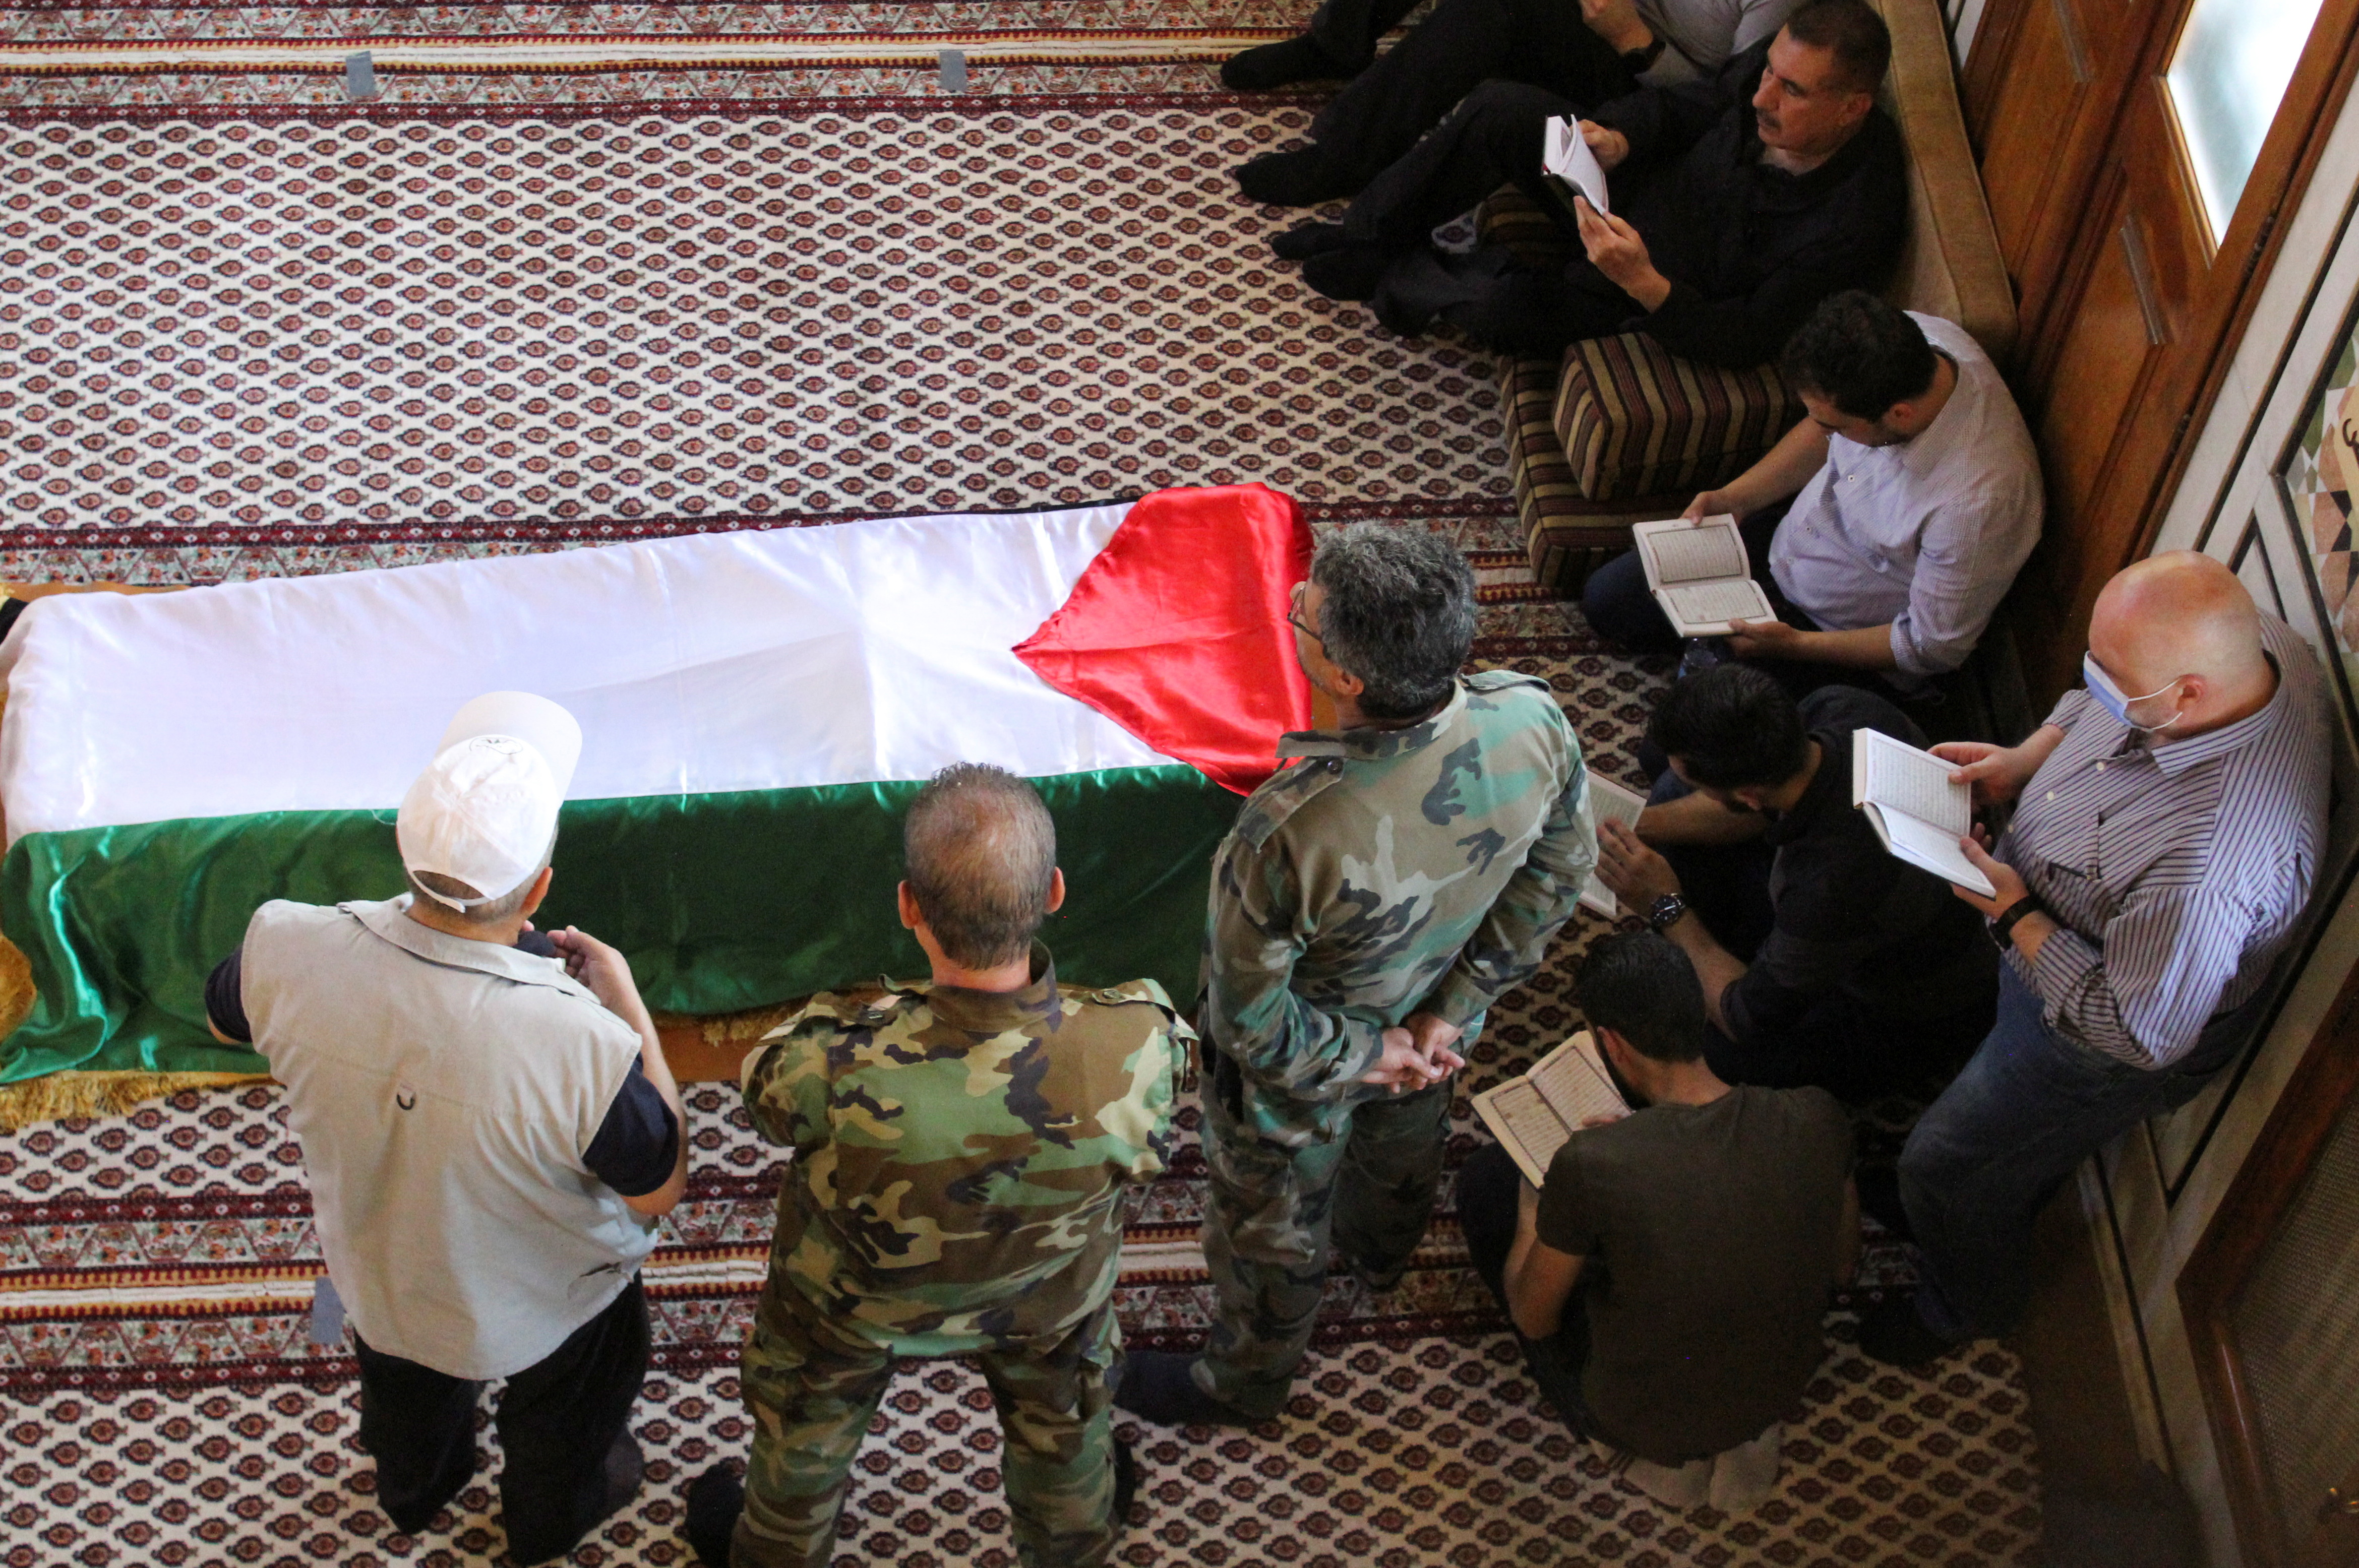 Mourners stand near the coffin of Ahmed Jibril, founder of pro-Syrian Palestinian guerrilla faction during his funeral at a mosque in Damascus